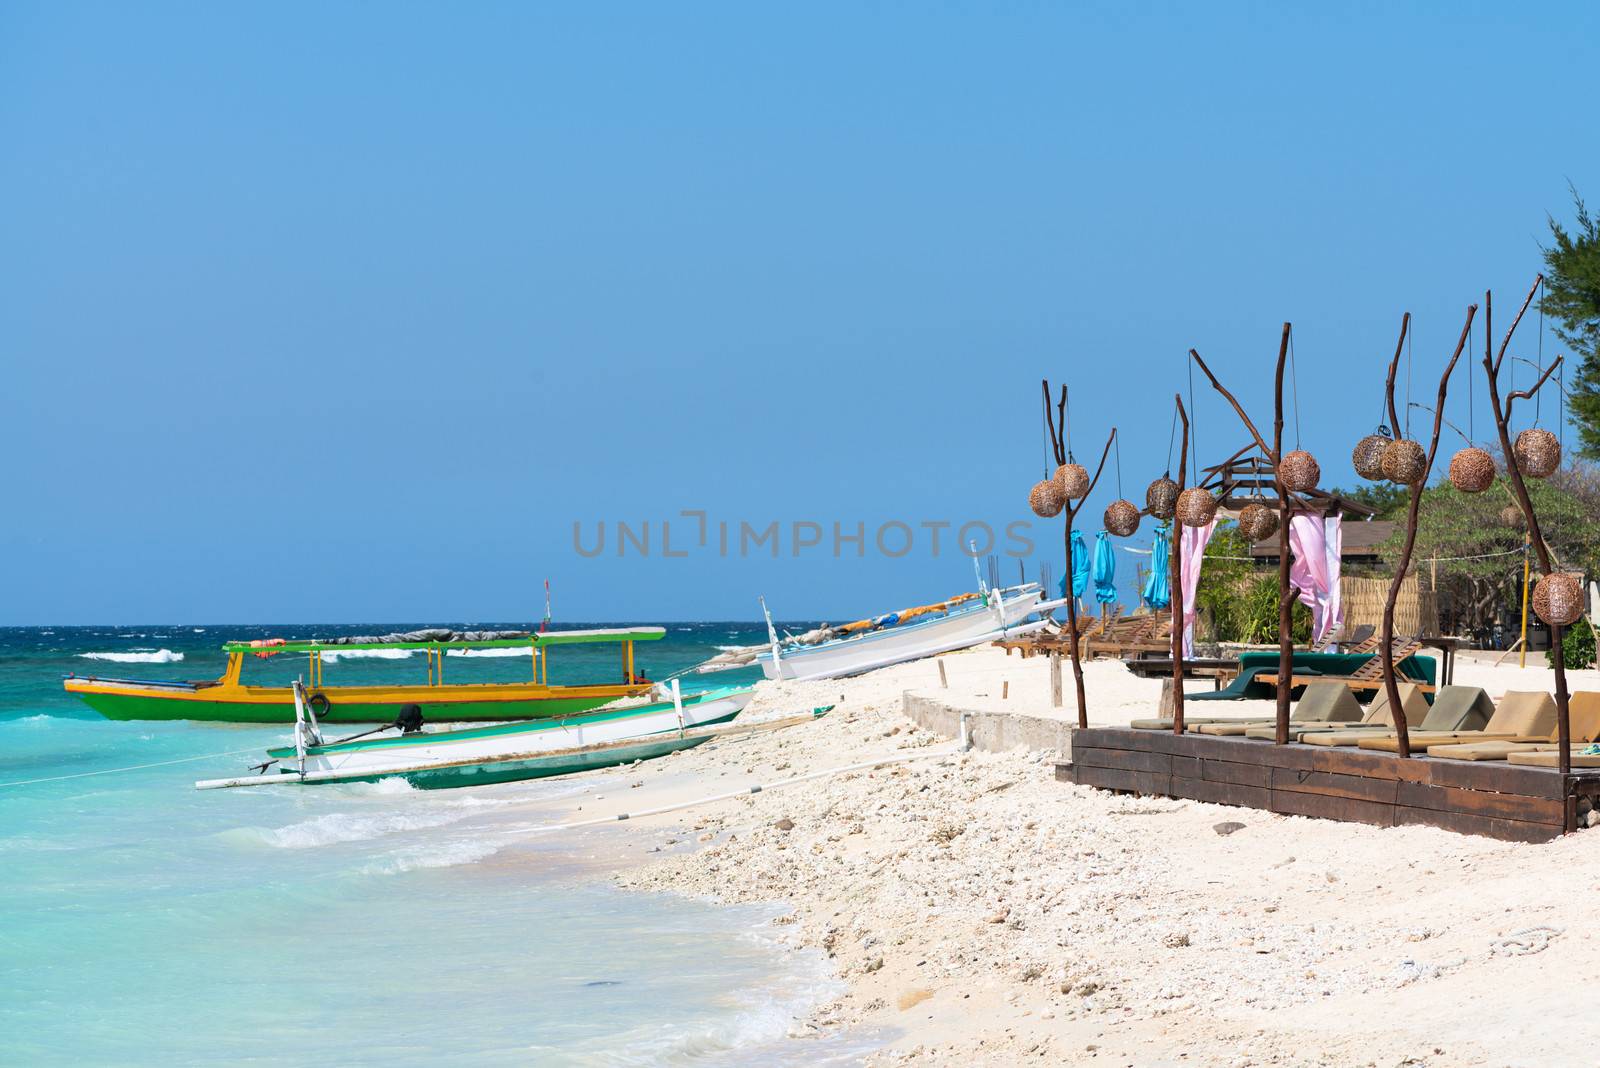 Small wooden tourist and fishing long boats near sand beach with cafe and beach beds in front, Gili Trawangan island, Indonesia 